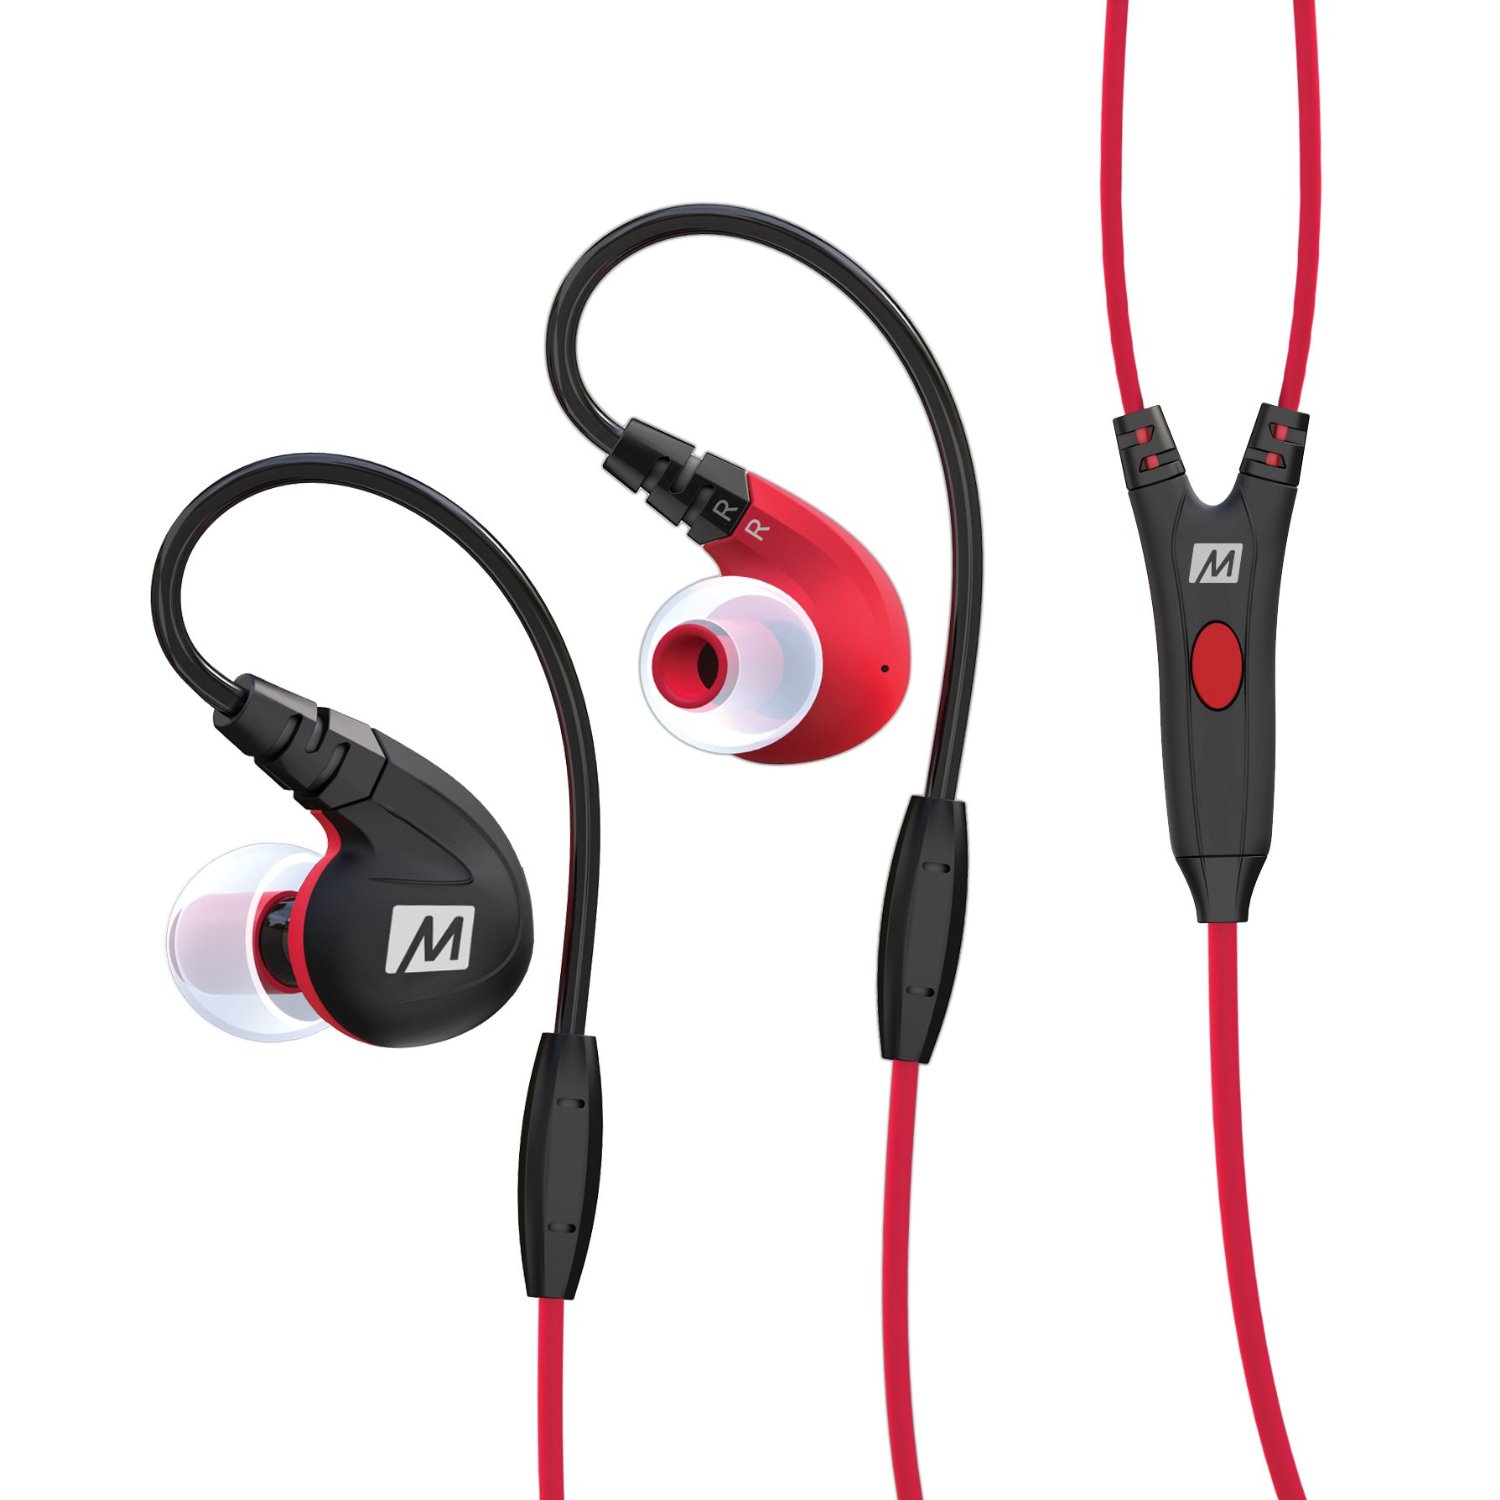 Amazon DEAL OF THE DAY – Select MEE Audio In-Ear Headphones – Just $19.99!